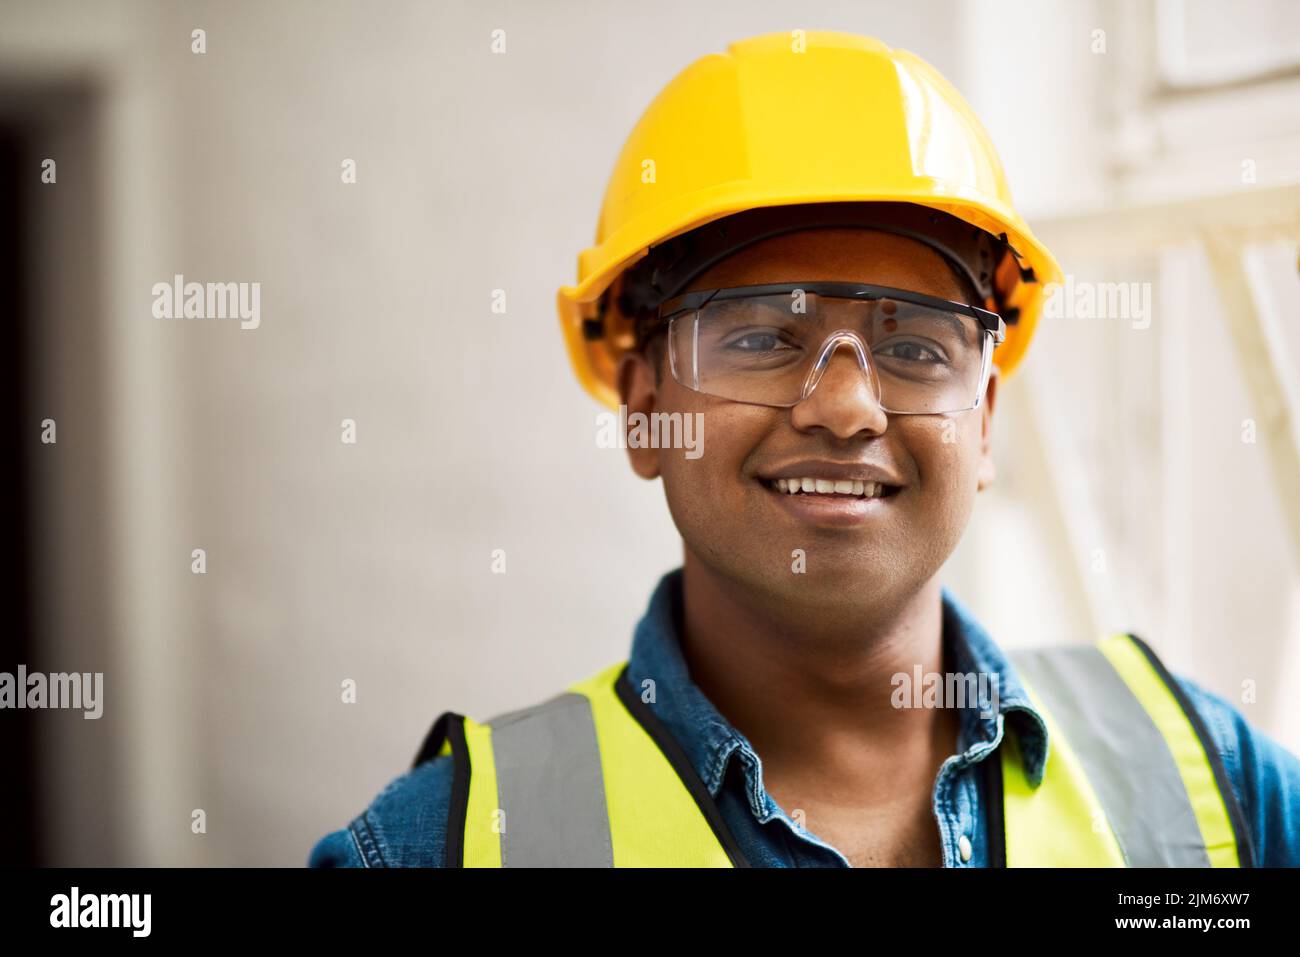 Construction work requires proper safety gear. a engineer wearing protective gear on a construction site. Stock Photo